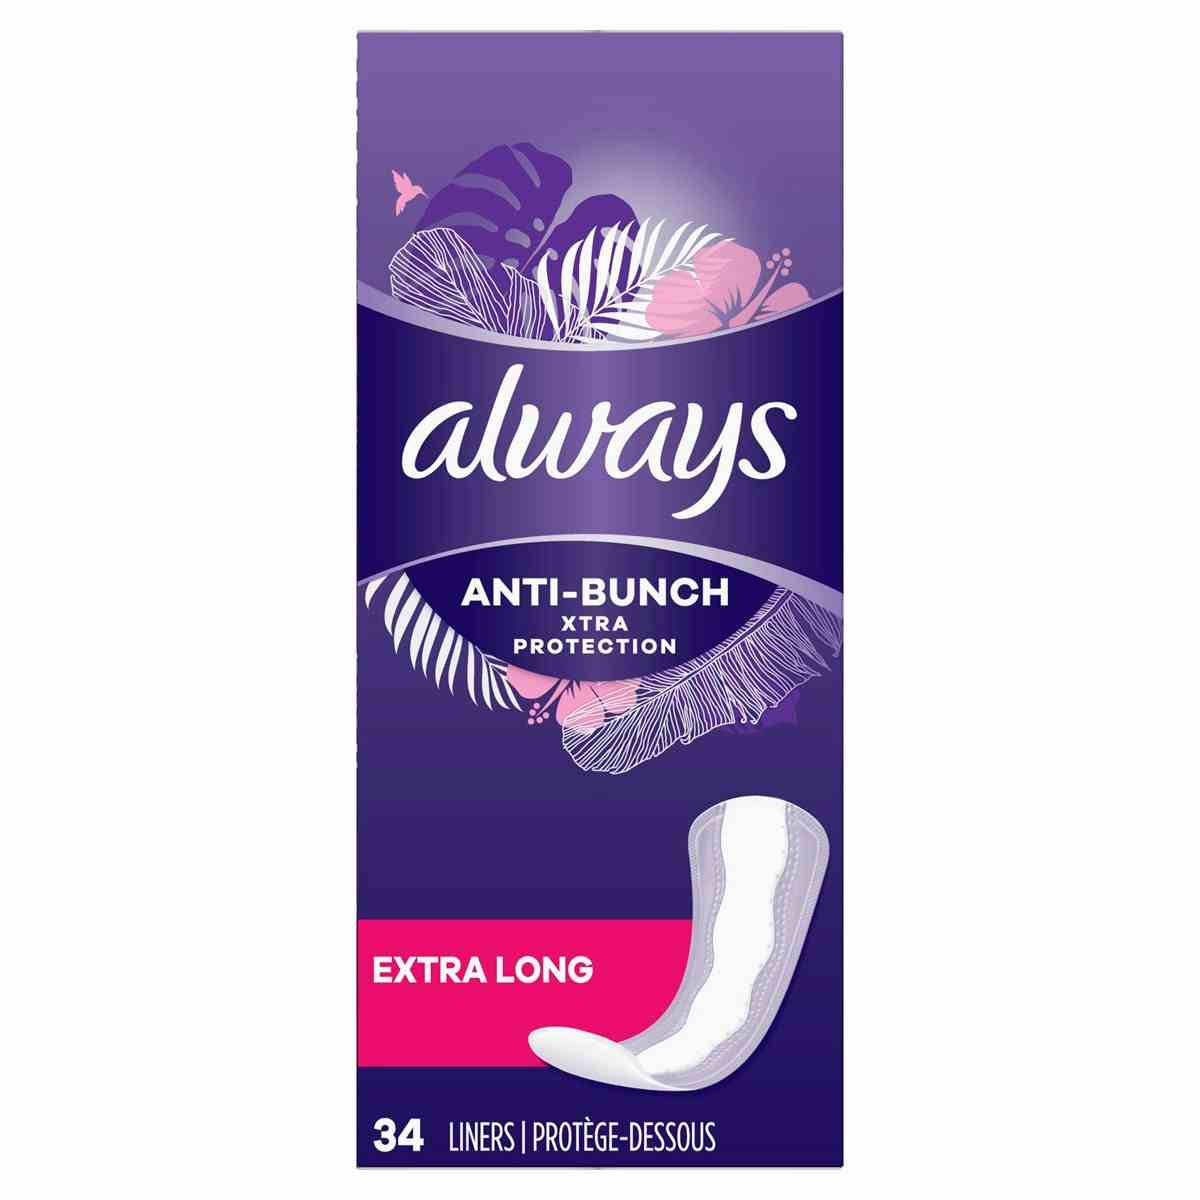 Always Anti-Bunch Xtra Protection Daily Liners, 80351704, Extra Long - Pack of 92